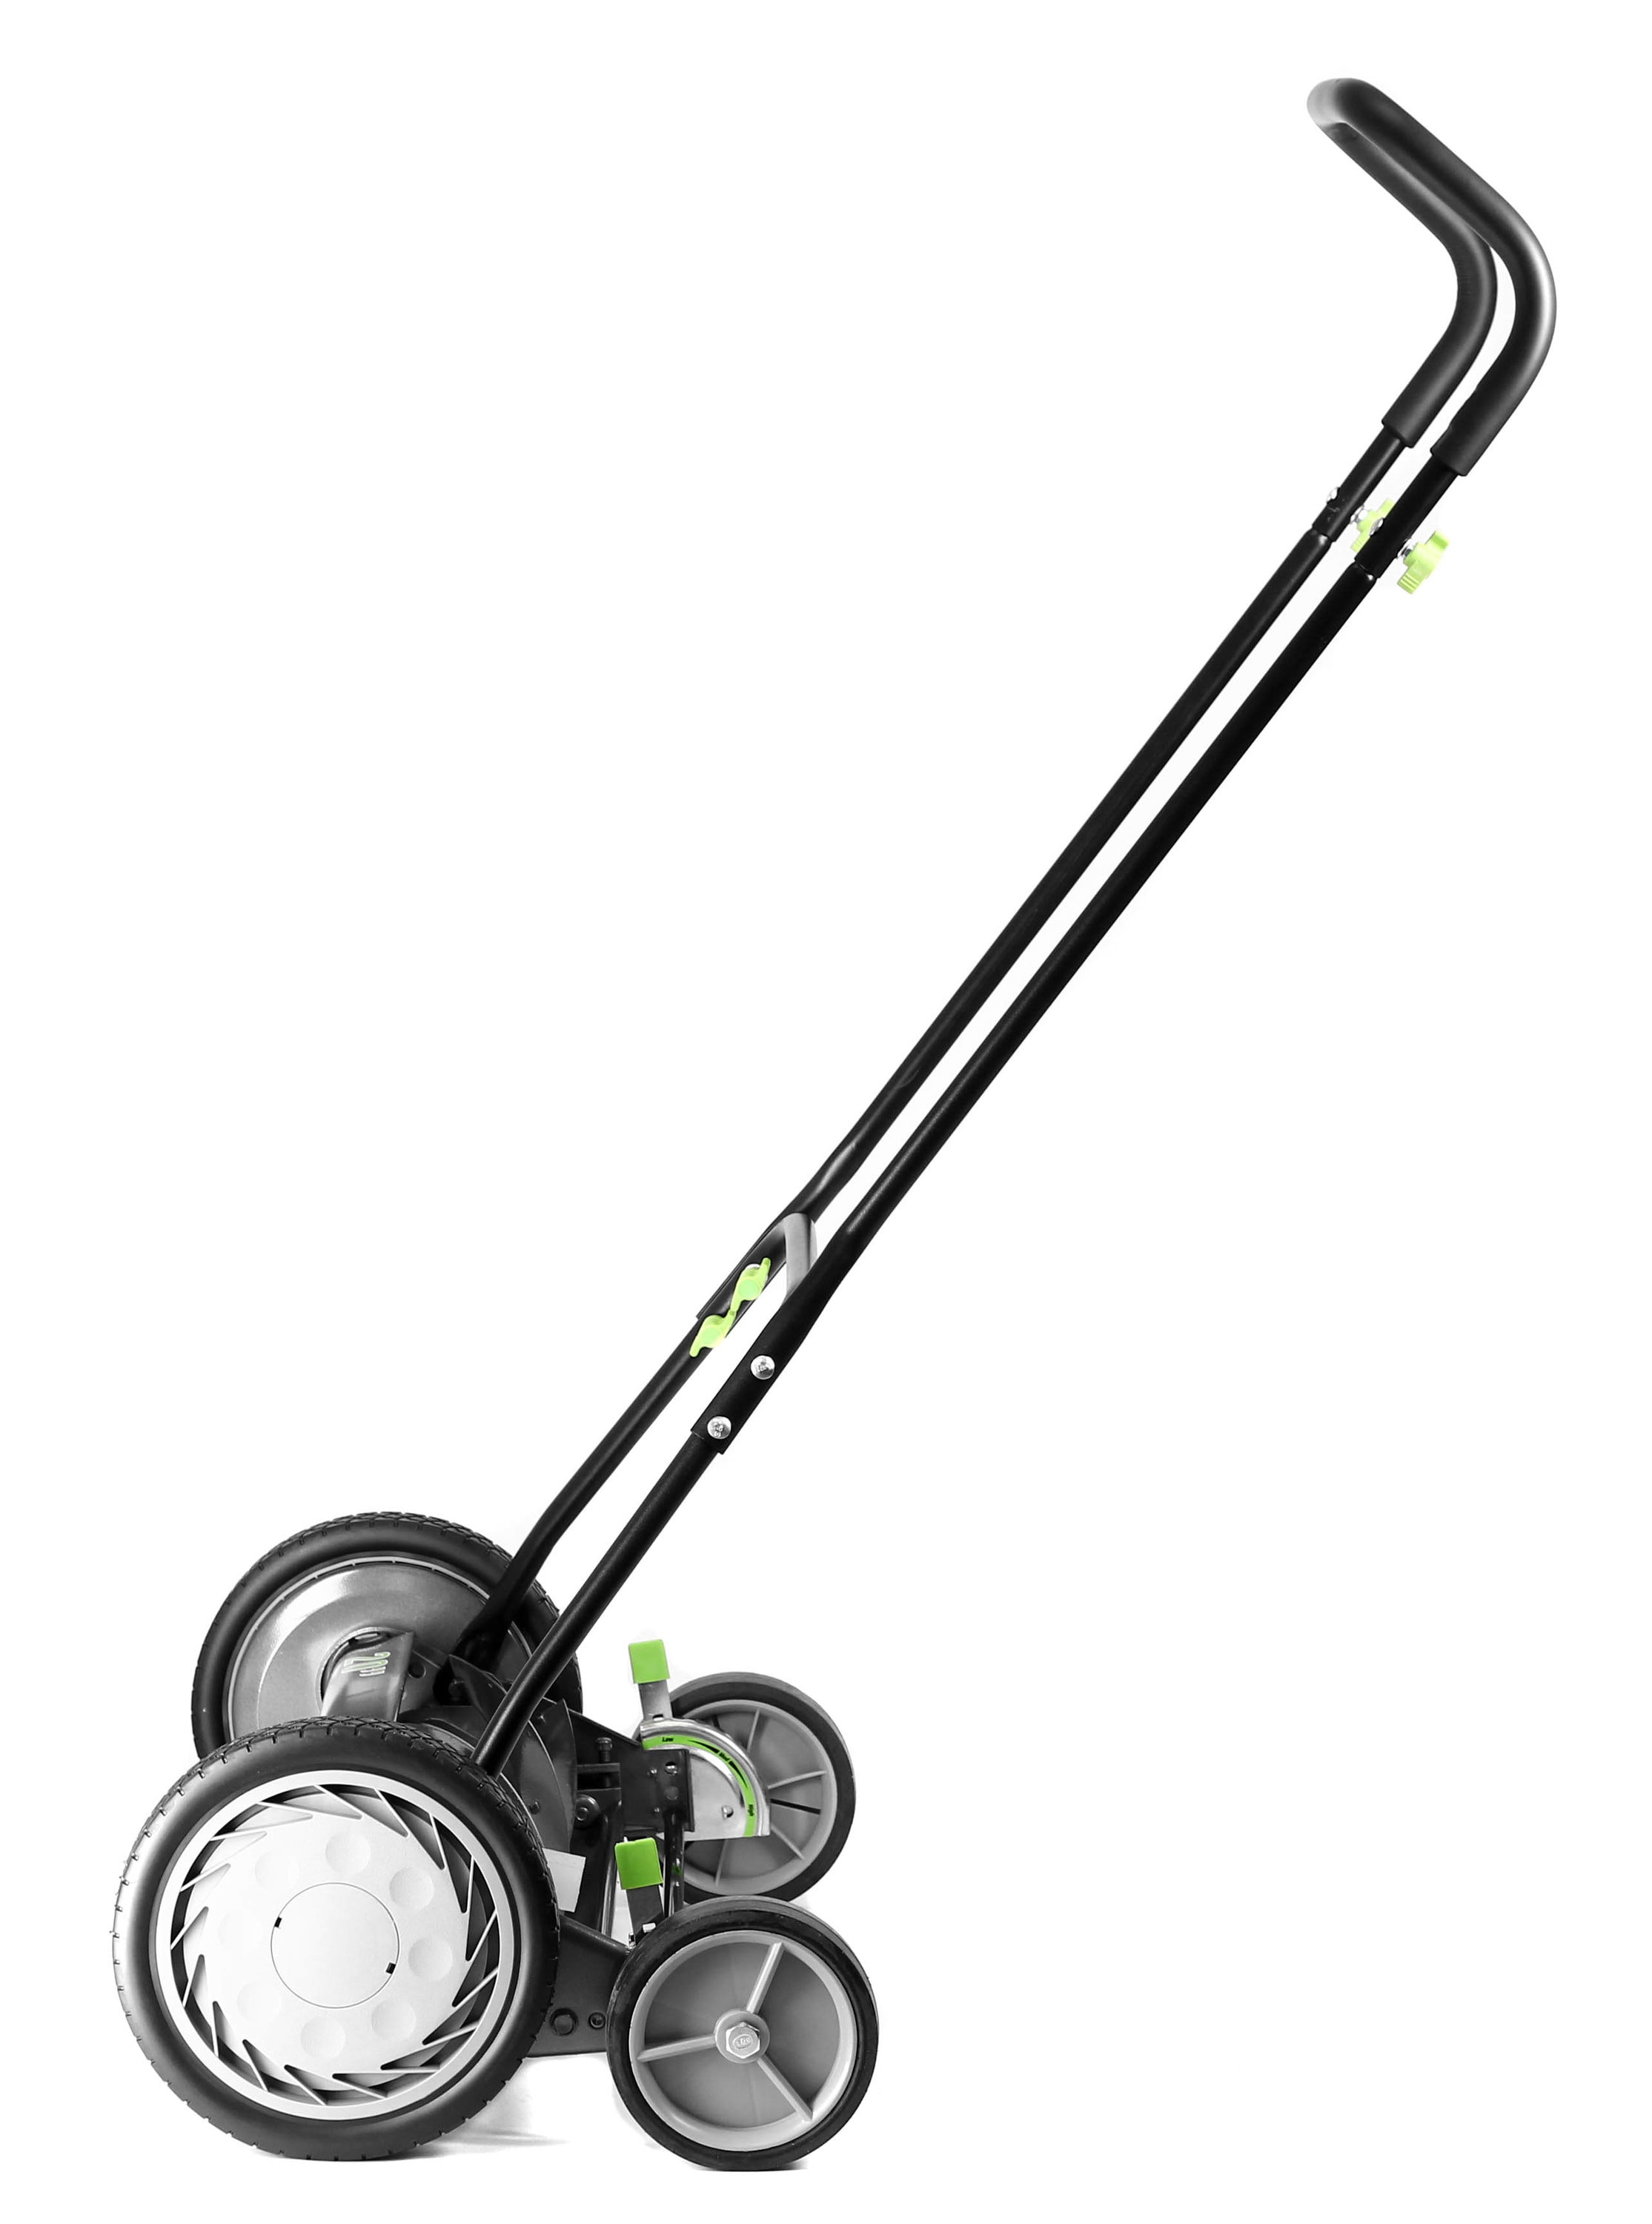 Reel Mowers – Tagged Earthwise– American Lawn Mower Co. EST 1895